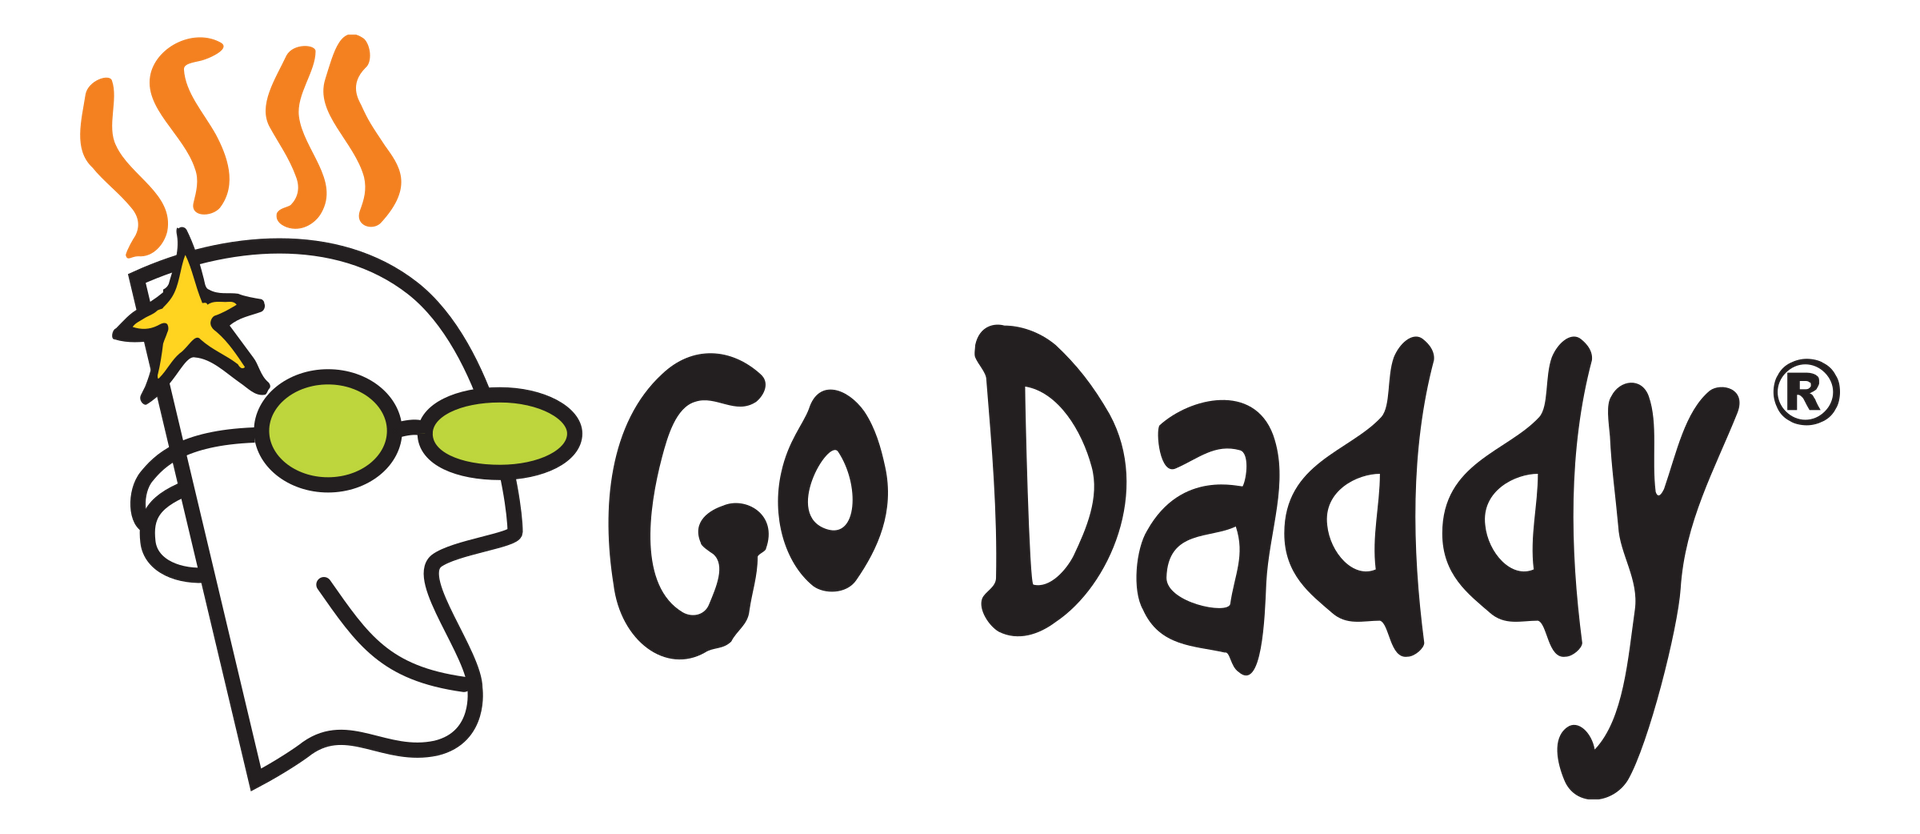 A logo for a company called go daddy